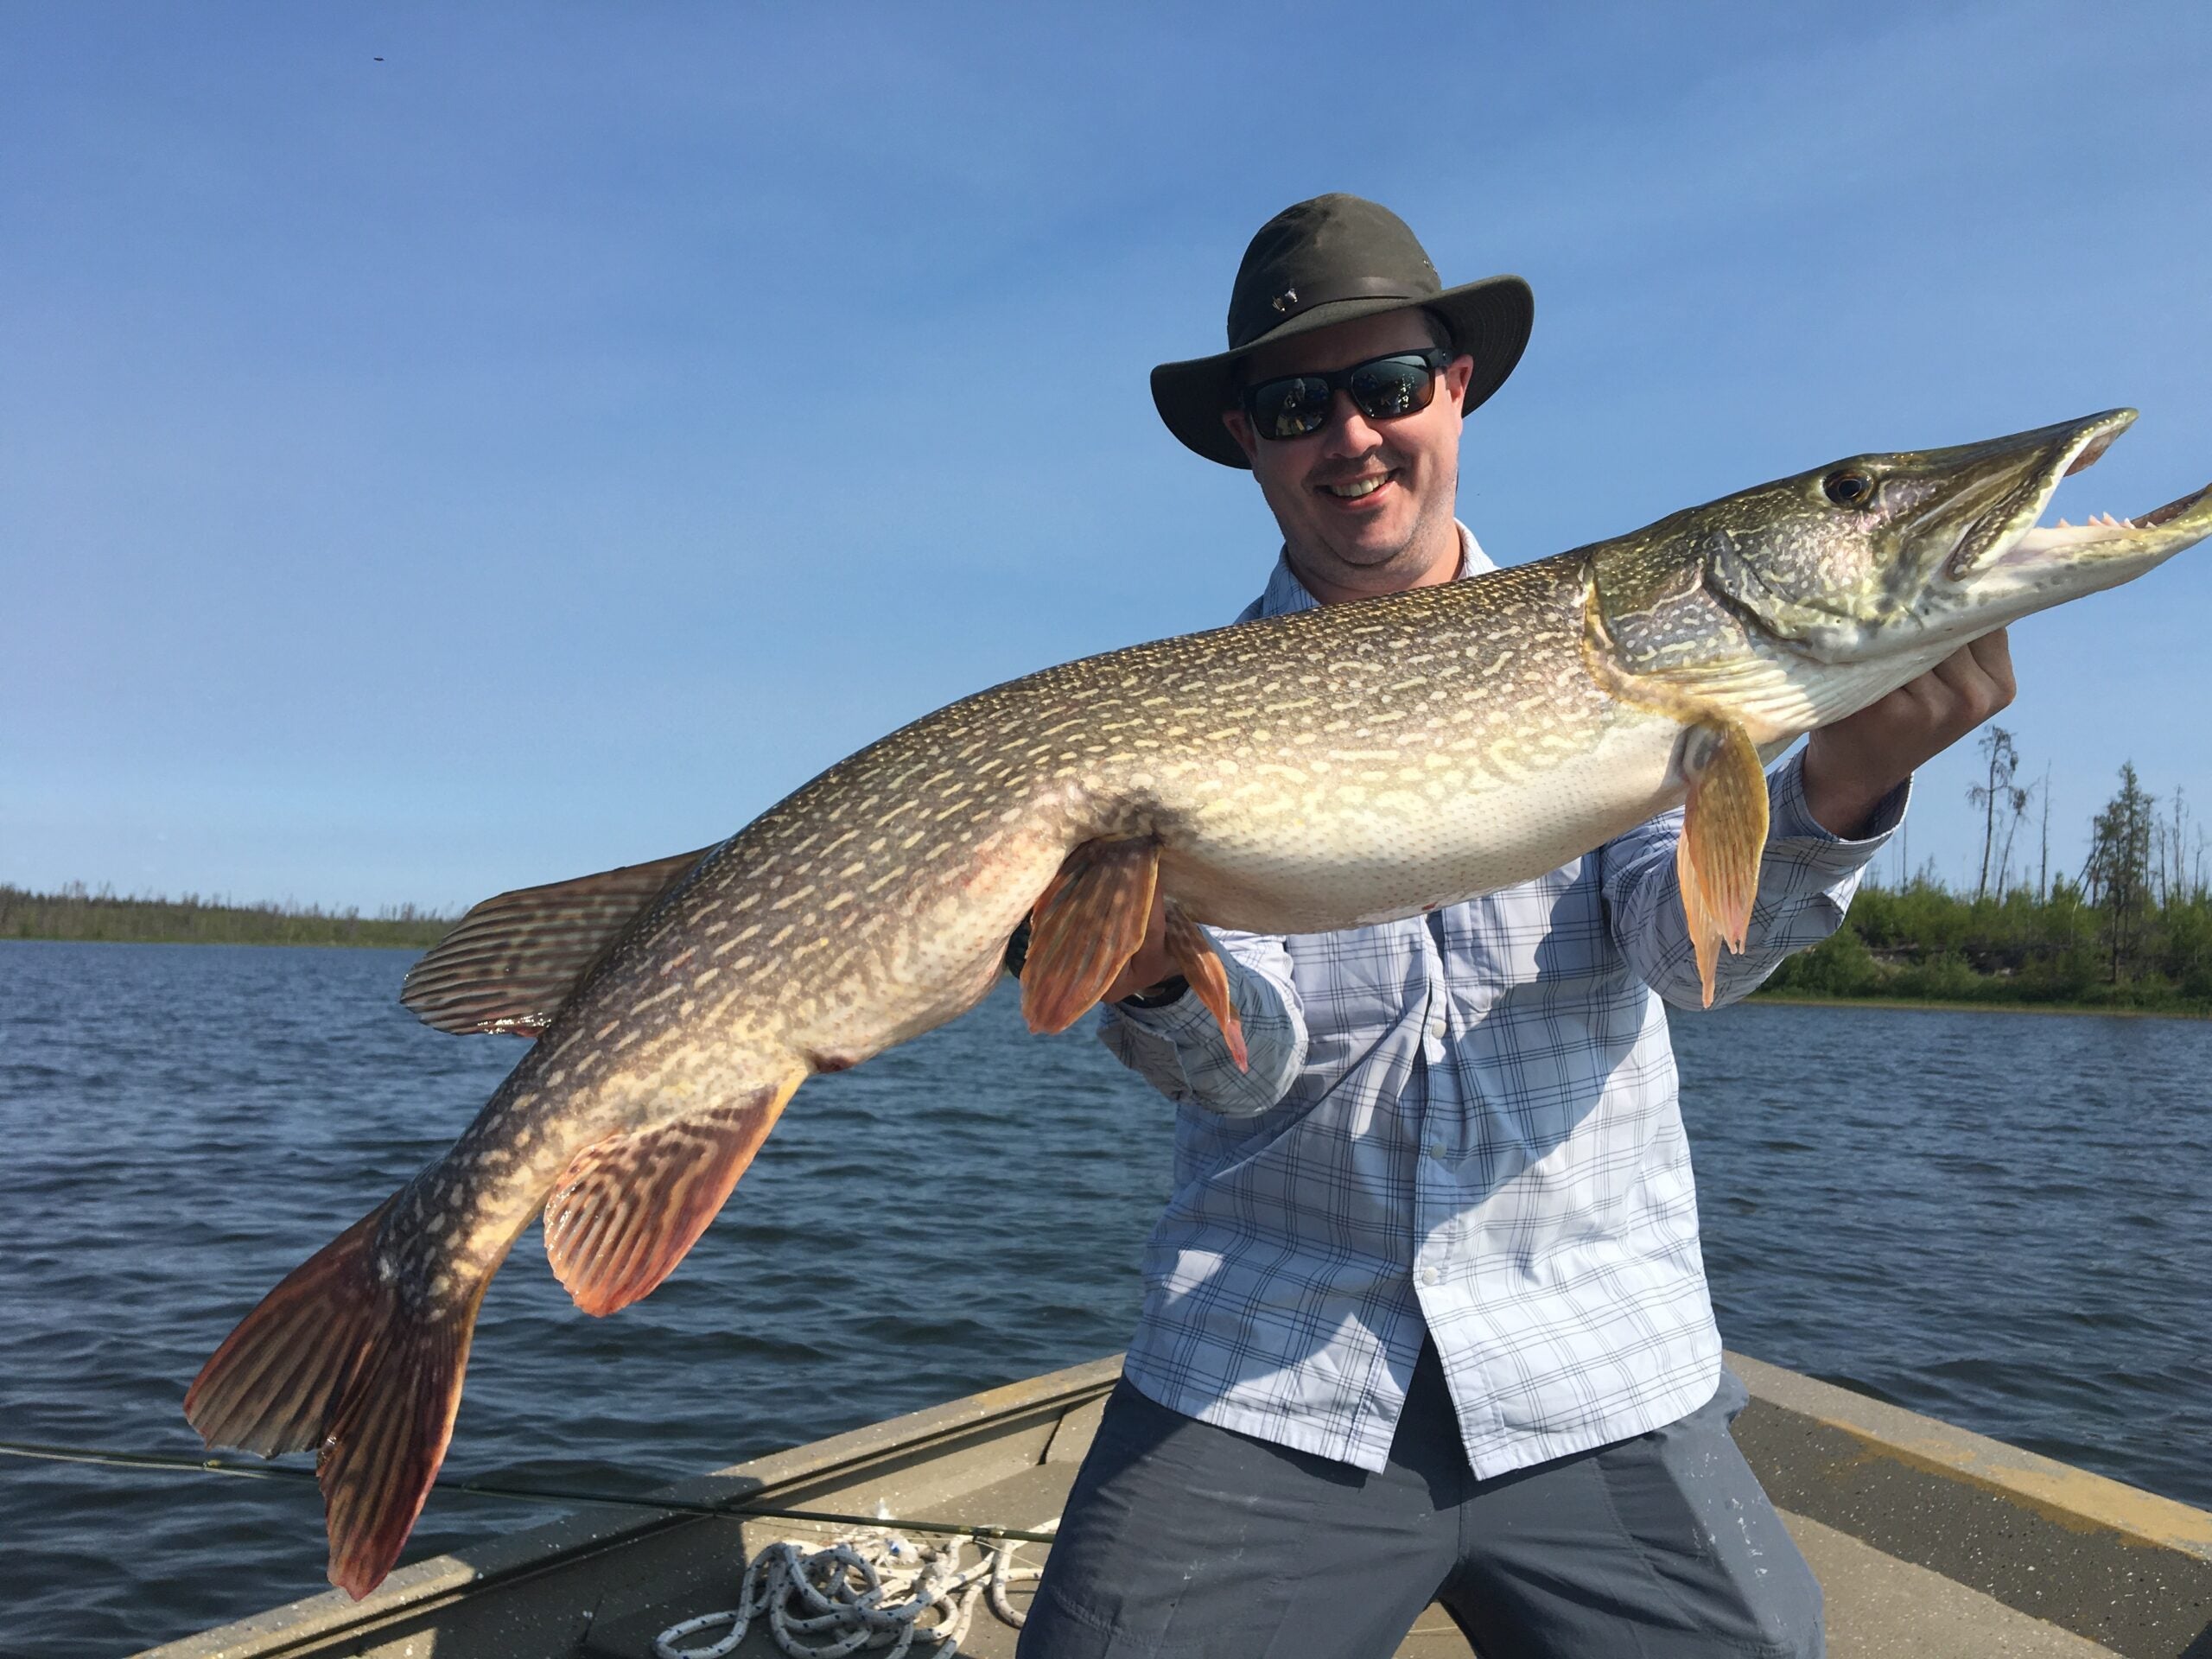 Field & Stream editor-in-chief holds up a huge northern pike